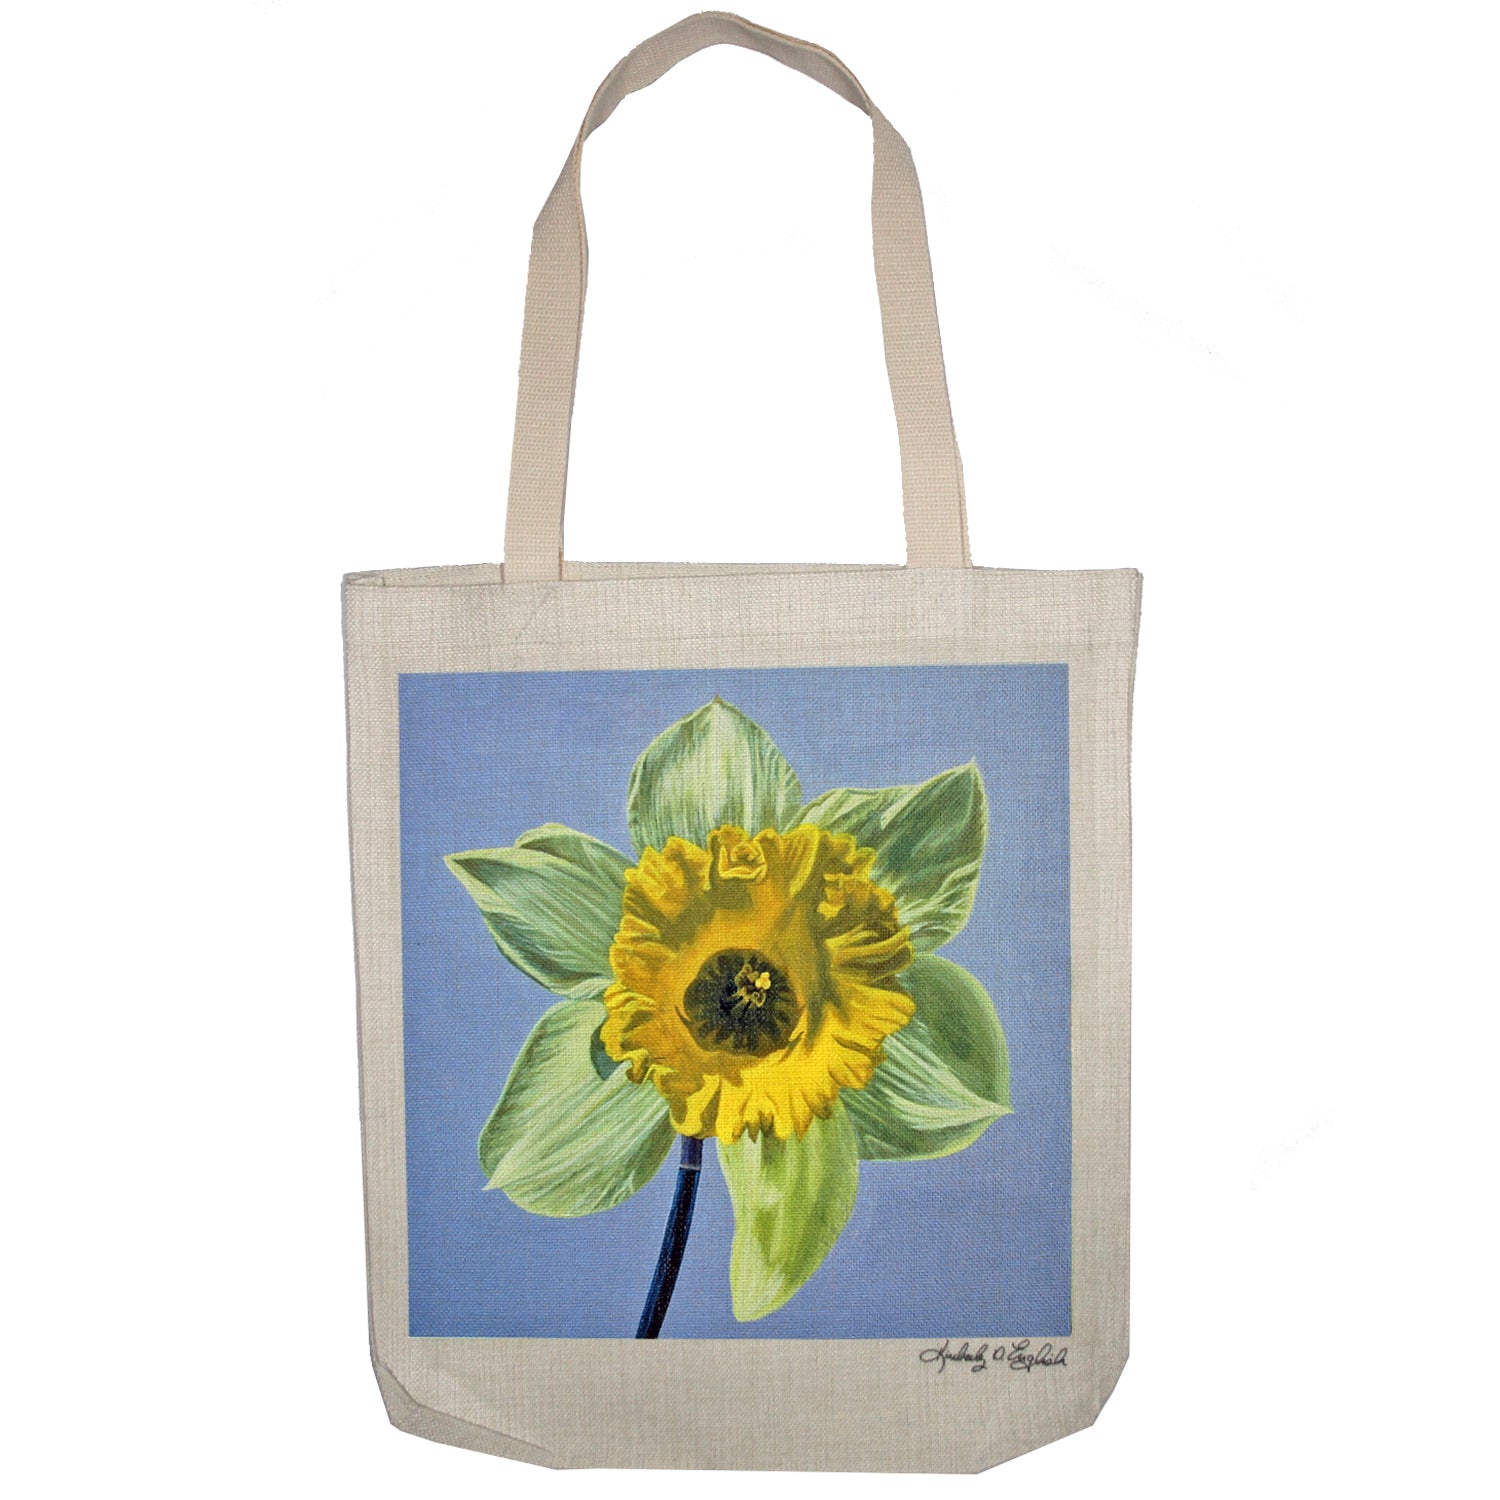 Hope After Darkness Tote Bag